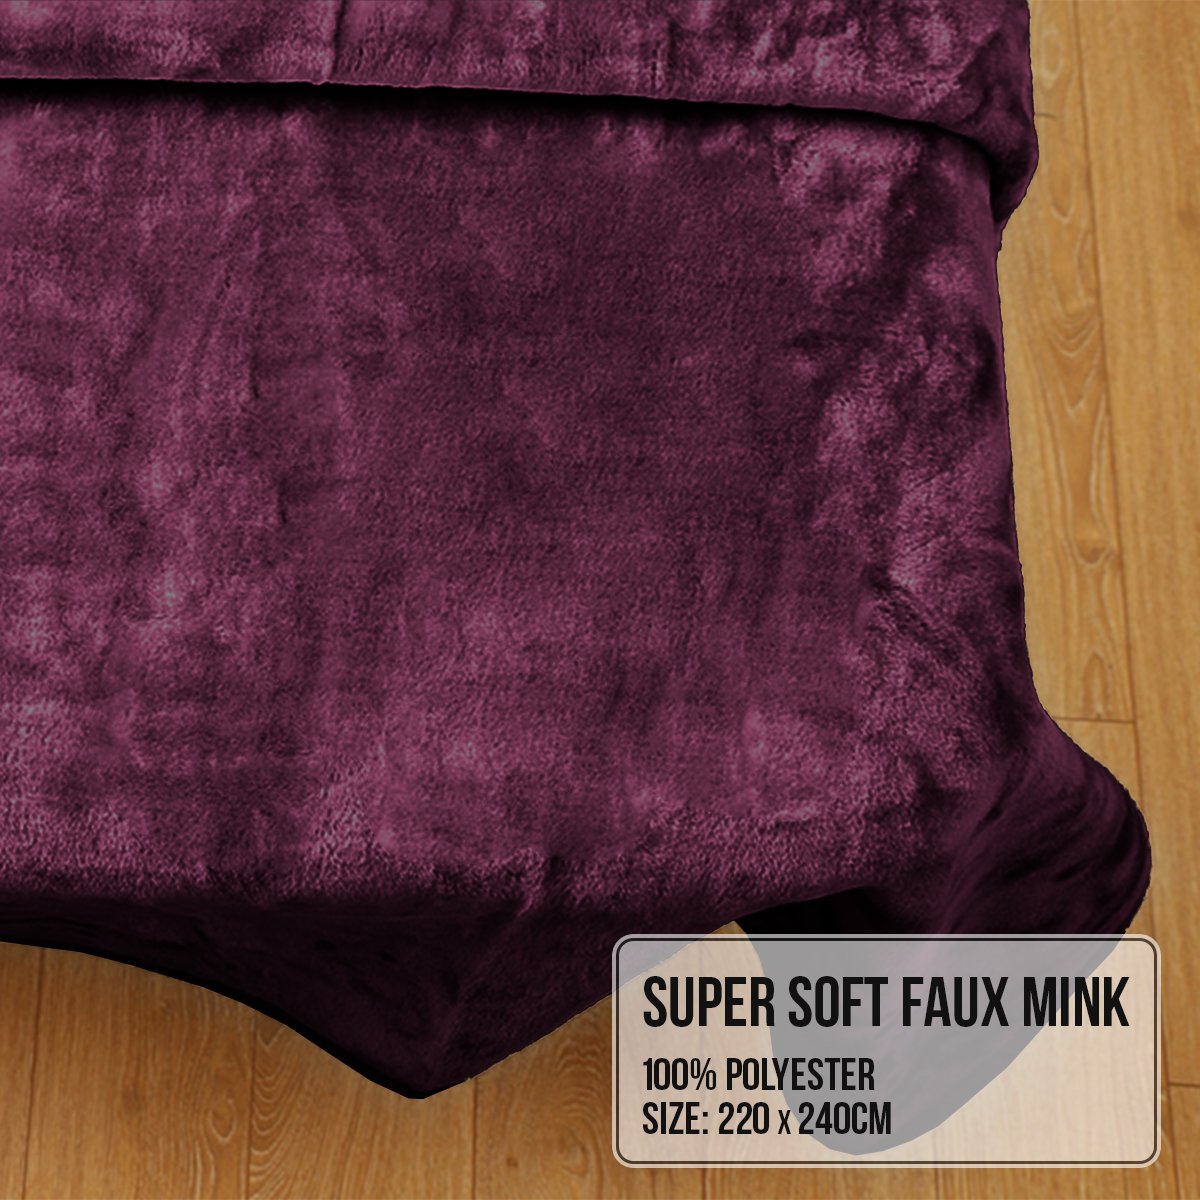 Laura Hill Mink Blanket Throw Purple Double Sided Queen Size Soft Plush Bed Faux Rug - BM House & Garden